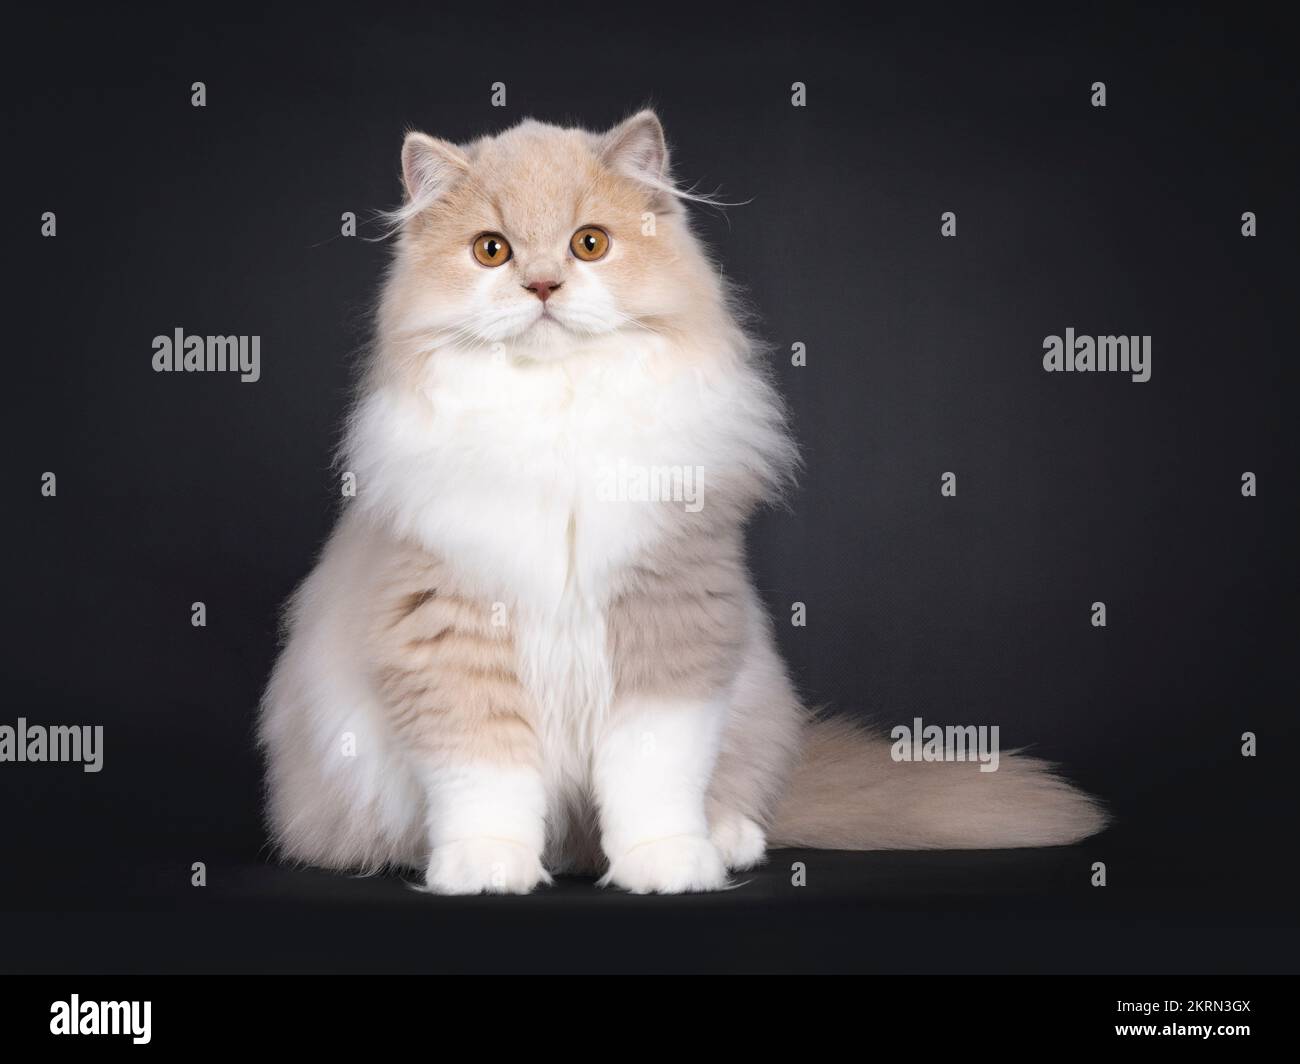 Rare male tortie British Longhair cat kitten, sitting up facing front. Looking towards camera. Isolated on a black background. Stock Photo